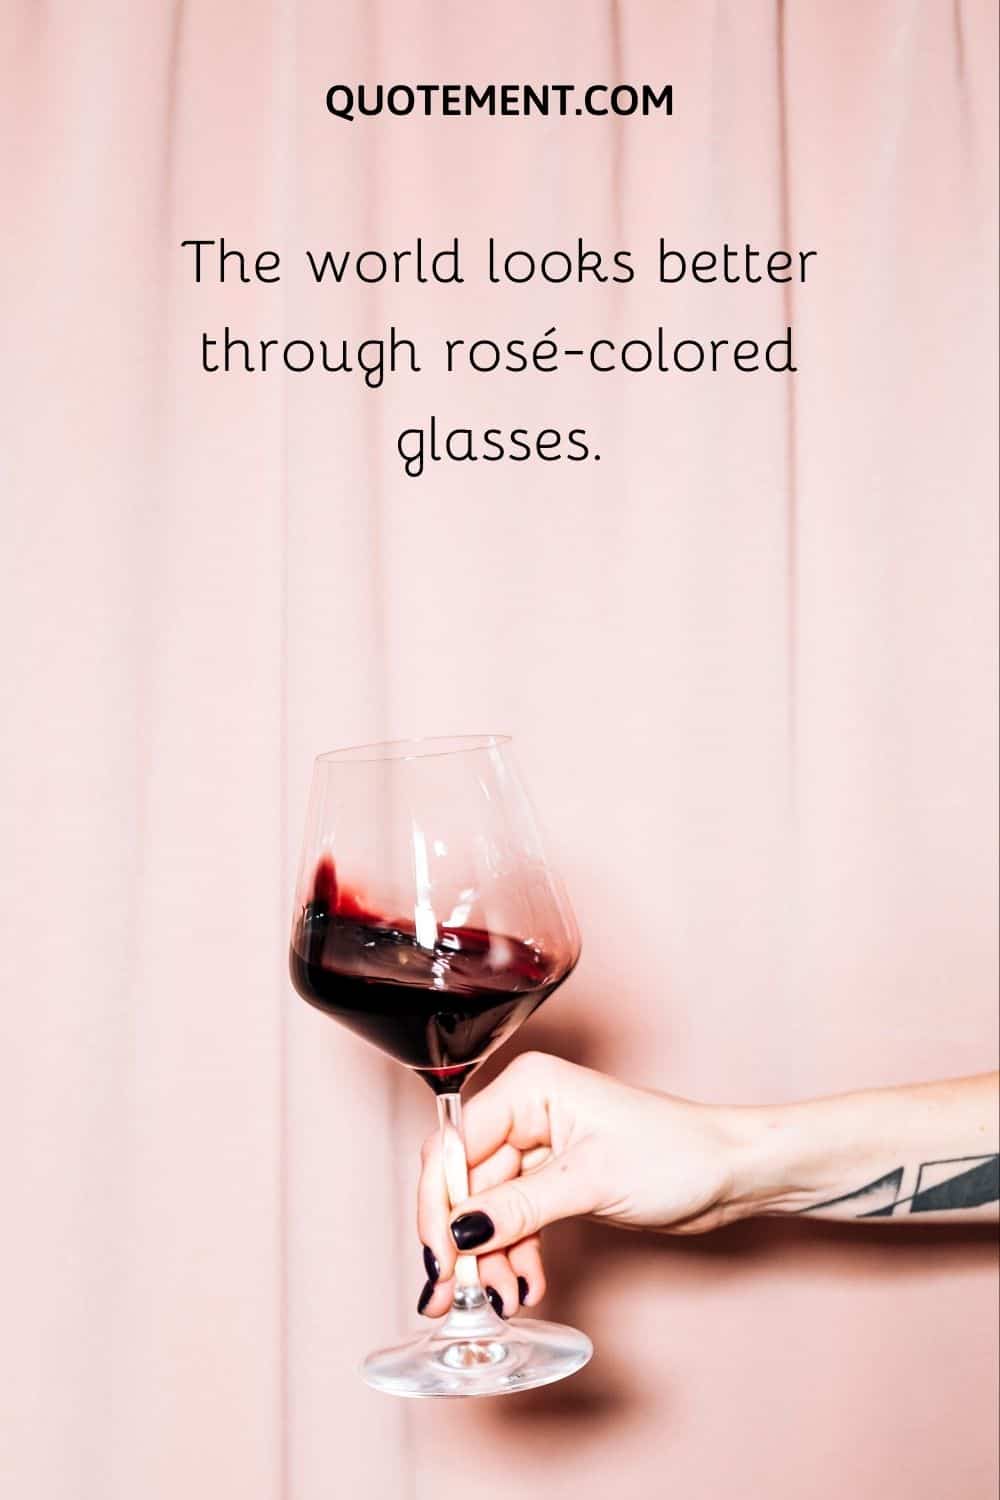 The world looks better through rosé-colored glasses